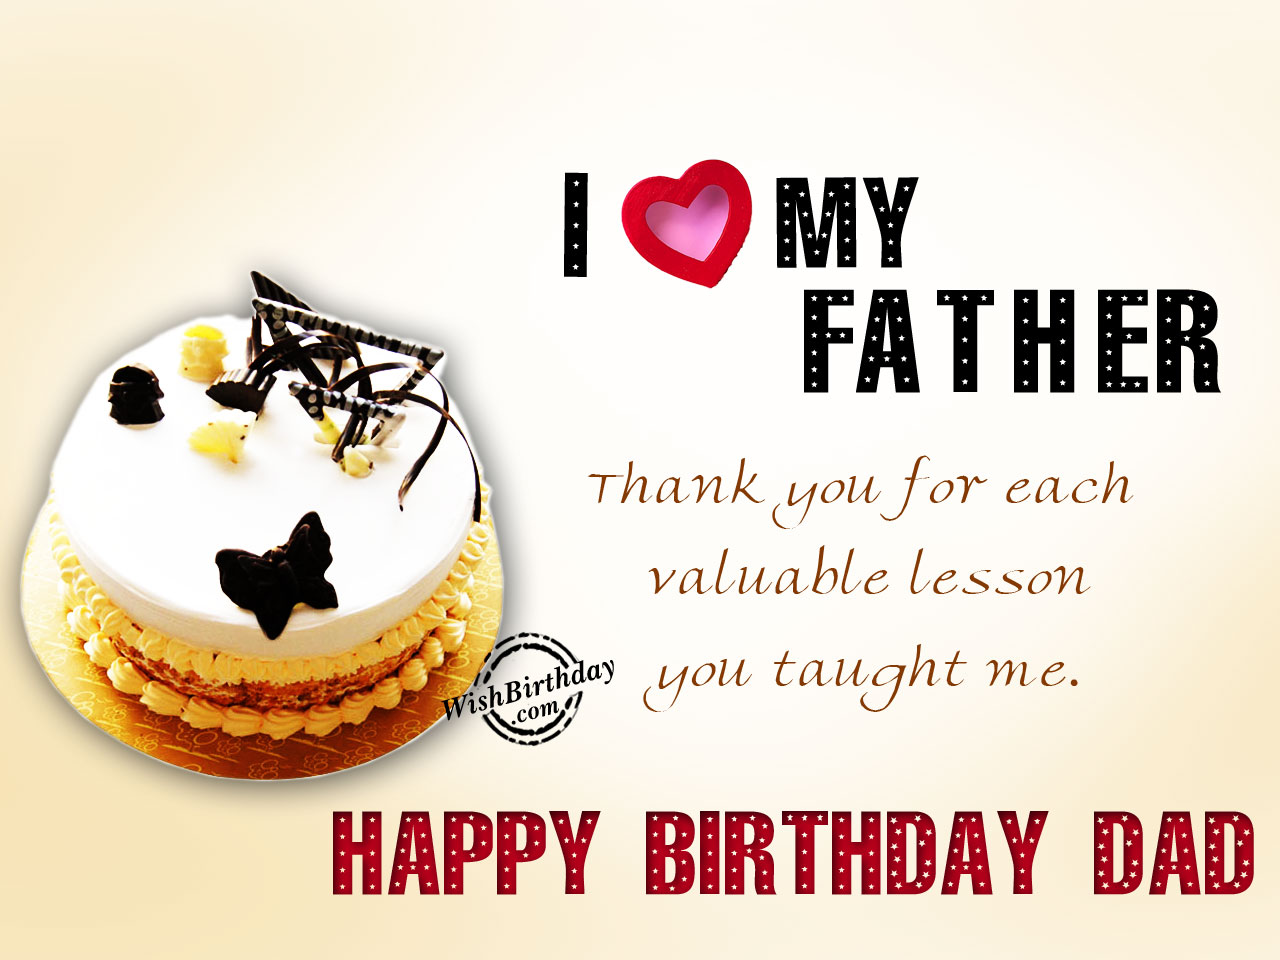 Birthday Wishes For Father - Birthday Images, Pictures